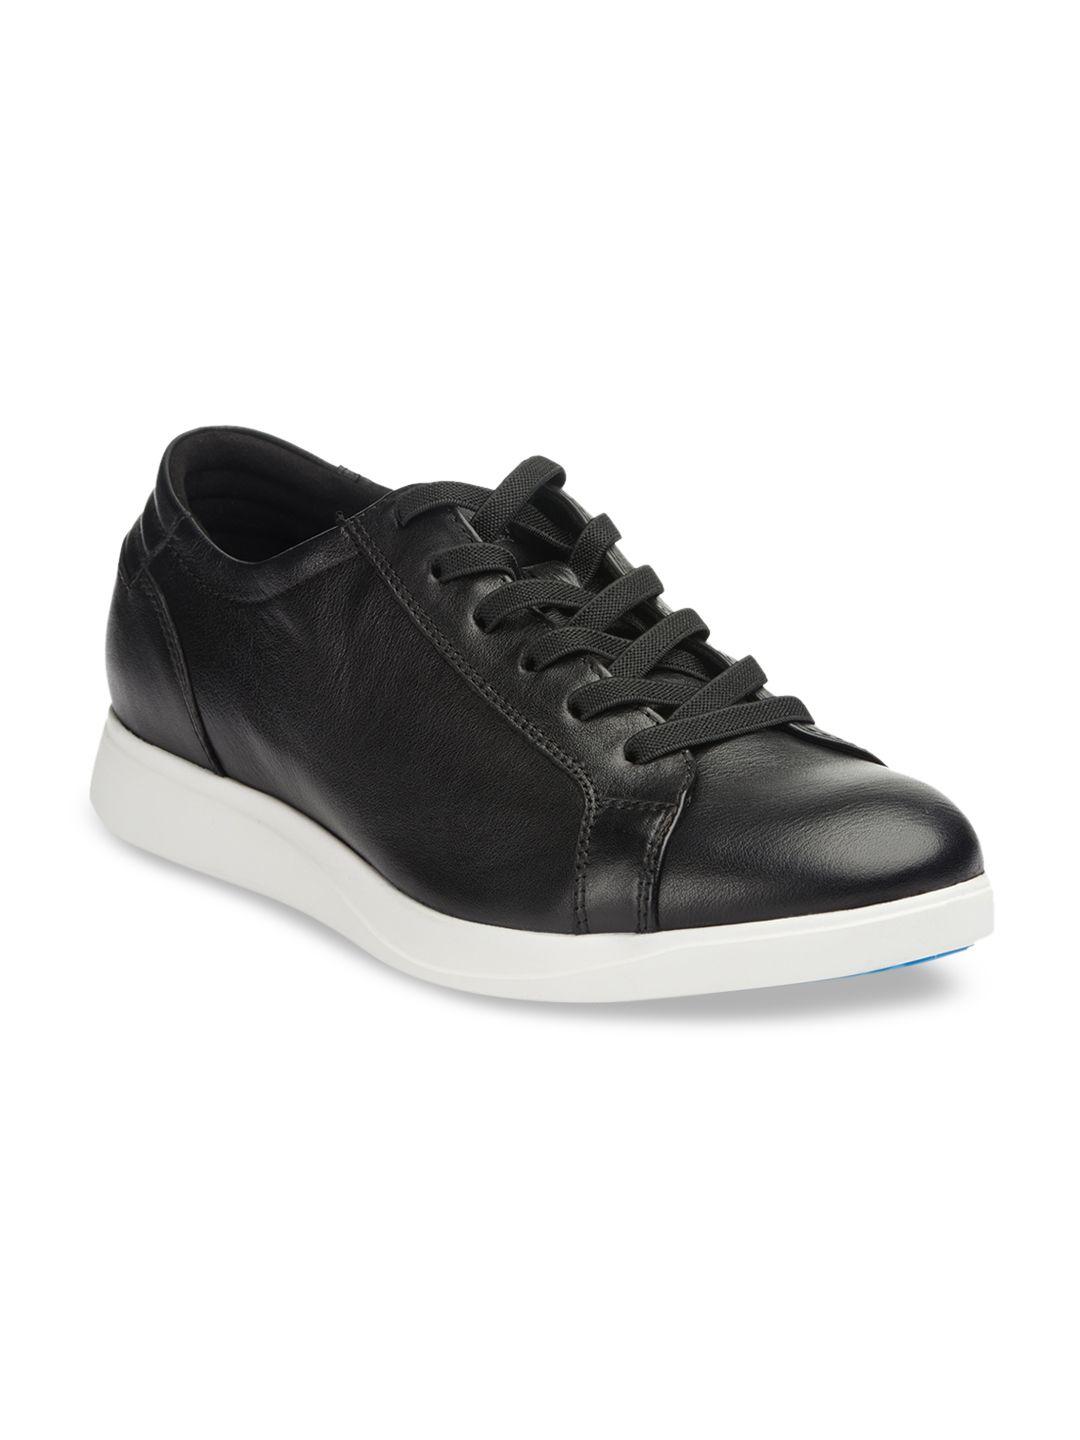 kenneth-cole-men-black-leather-sneakers